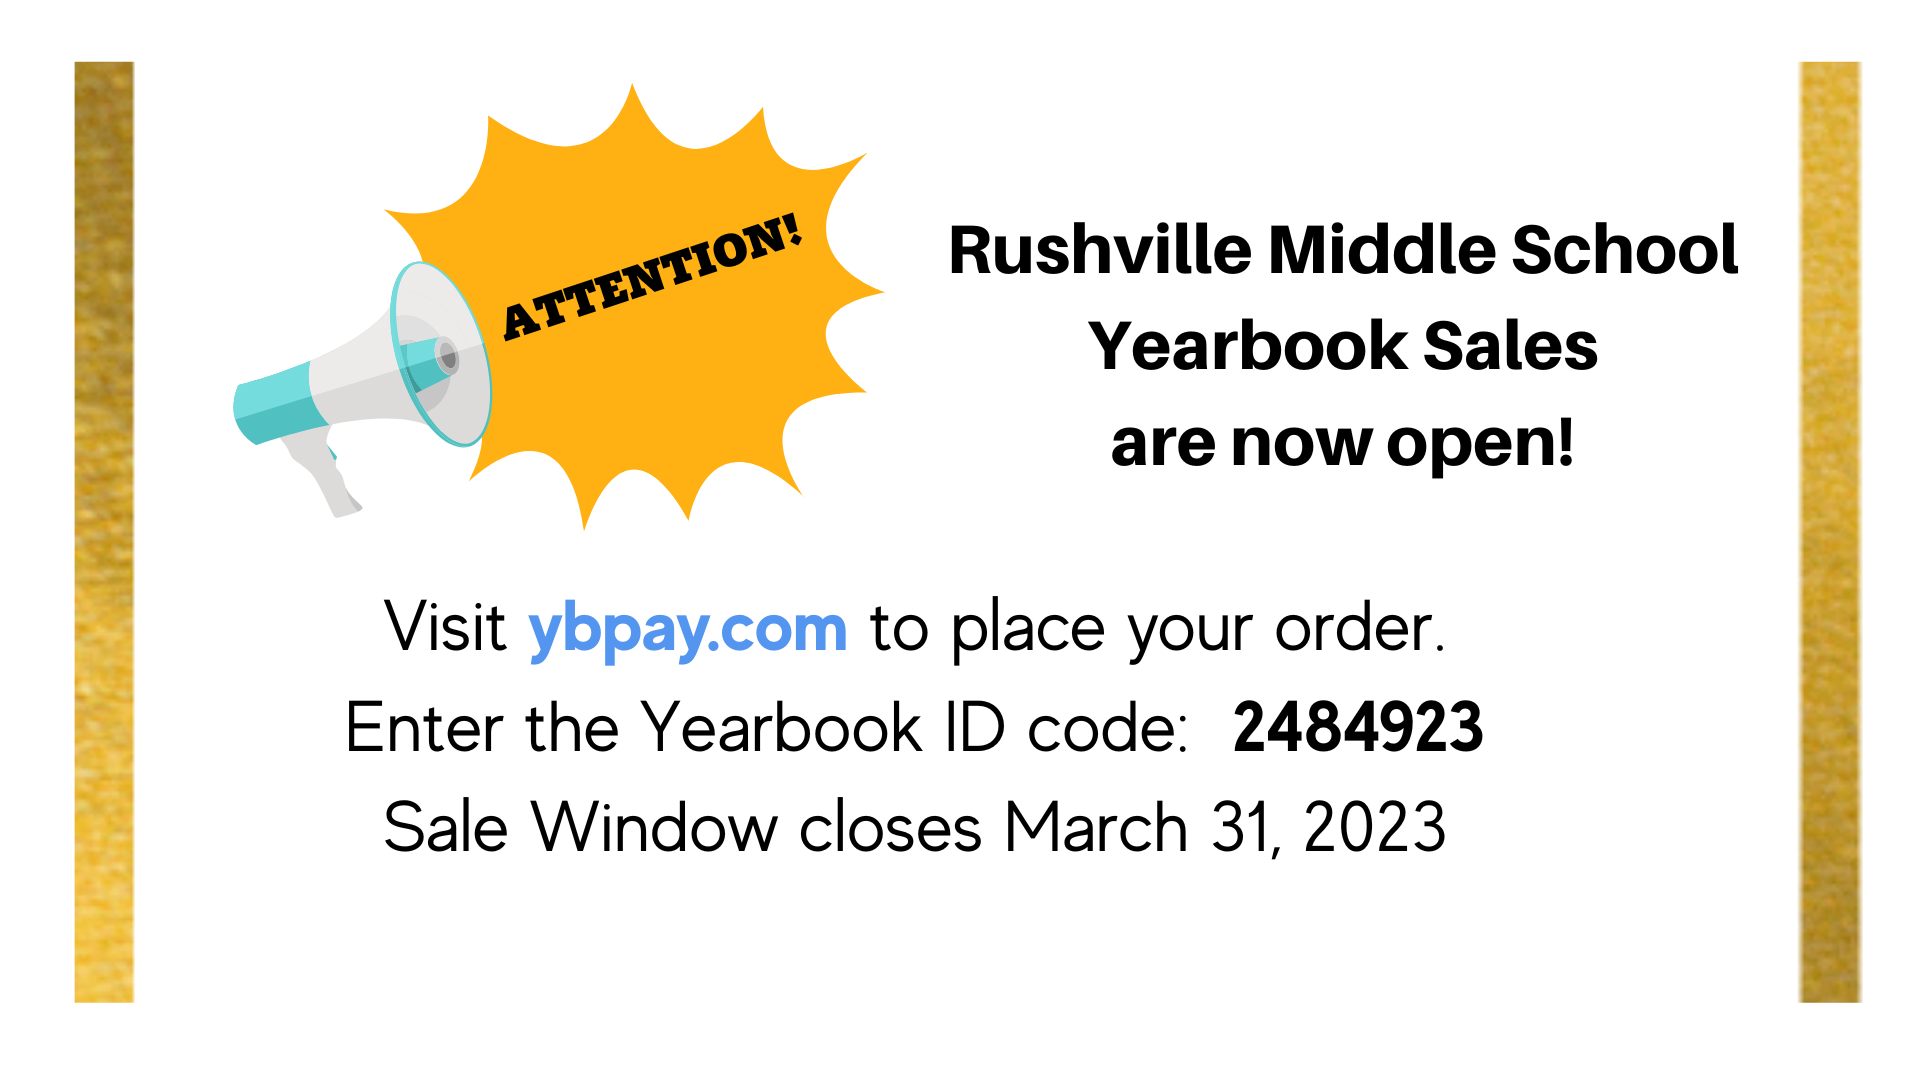 Rushville MS Yearbook Sales are Now Open.  Visit ybpay.com to order.  Use code 2484923